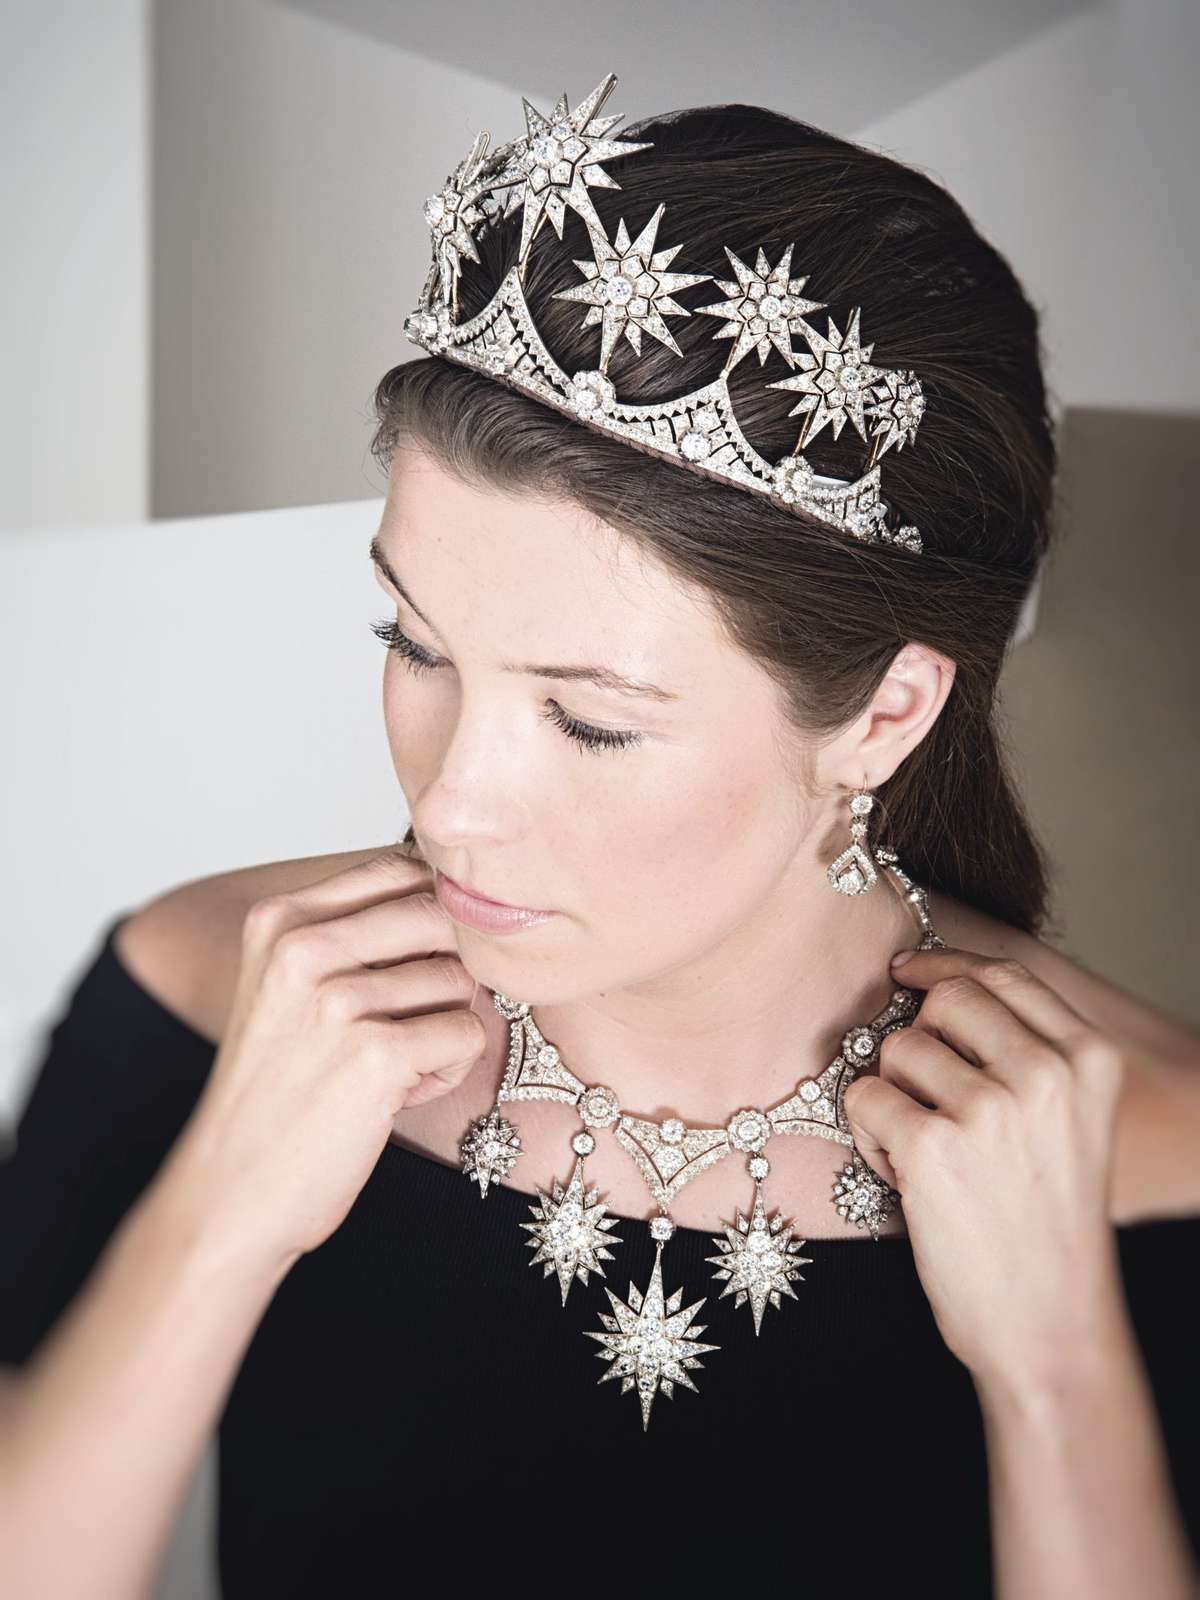 Victorian Star Tiara Auction - embed